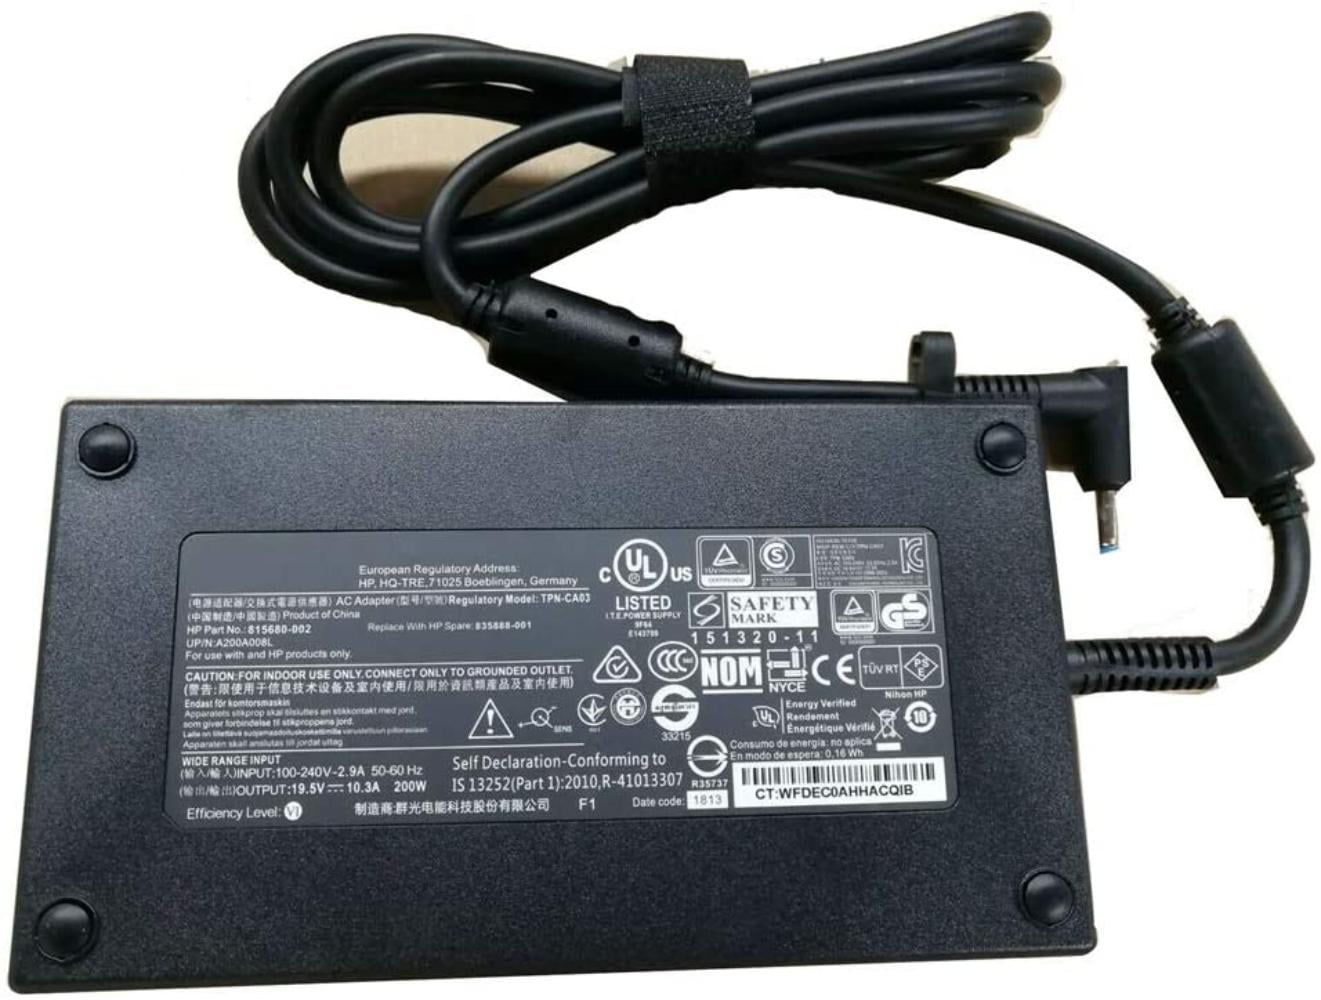 Power4Laptops AC Adapter Laptop Charger Power Supply Compatible with HP  Omen 17-w210ur 並行輸入品